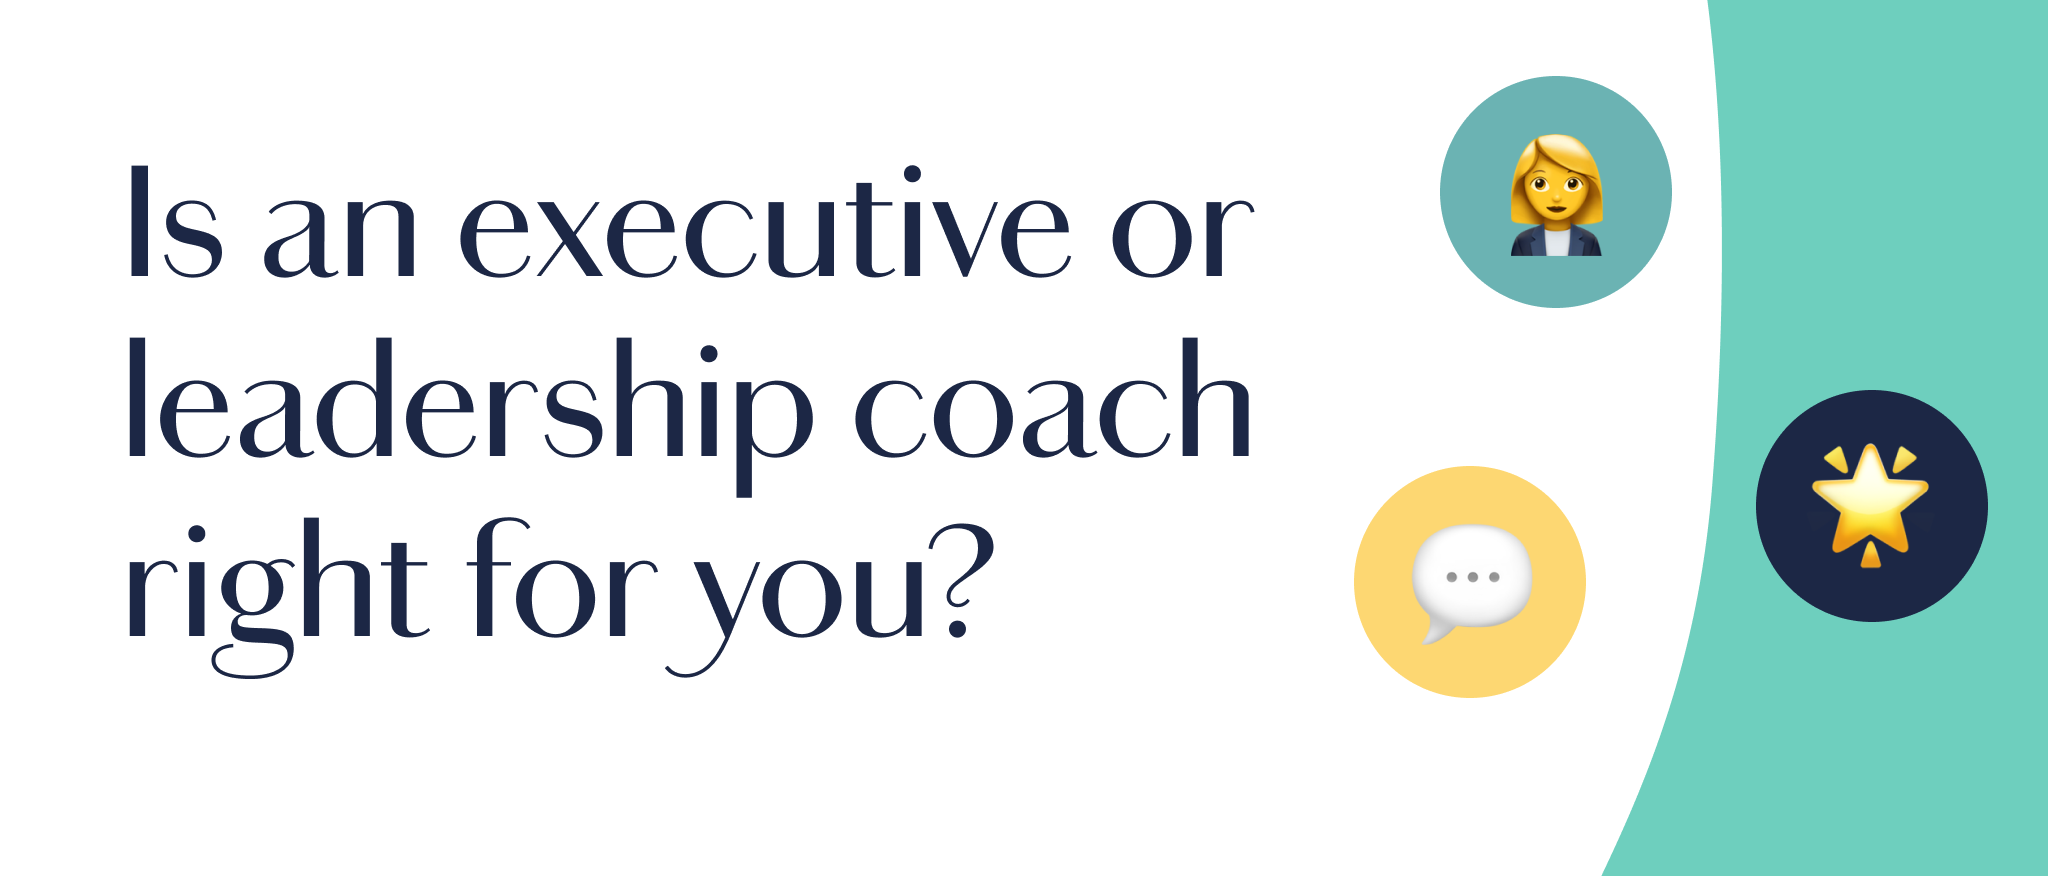 Considering an Executive or Leadership Coach? Here's What to Know.